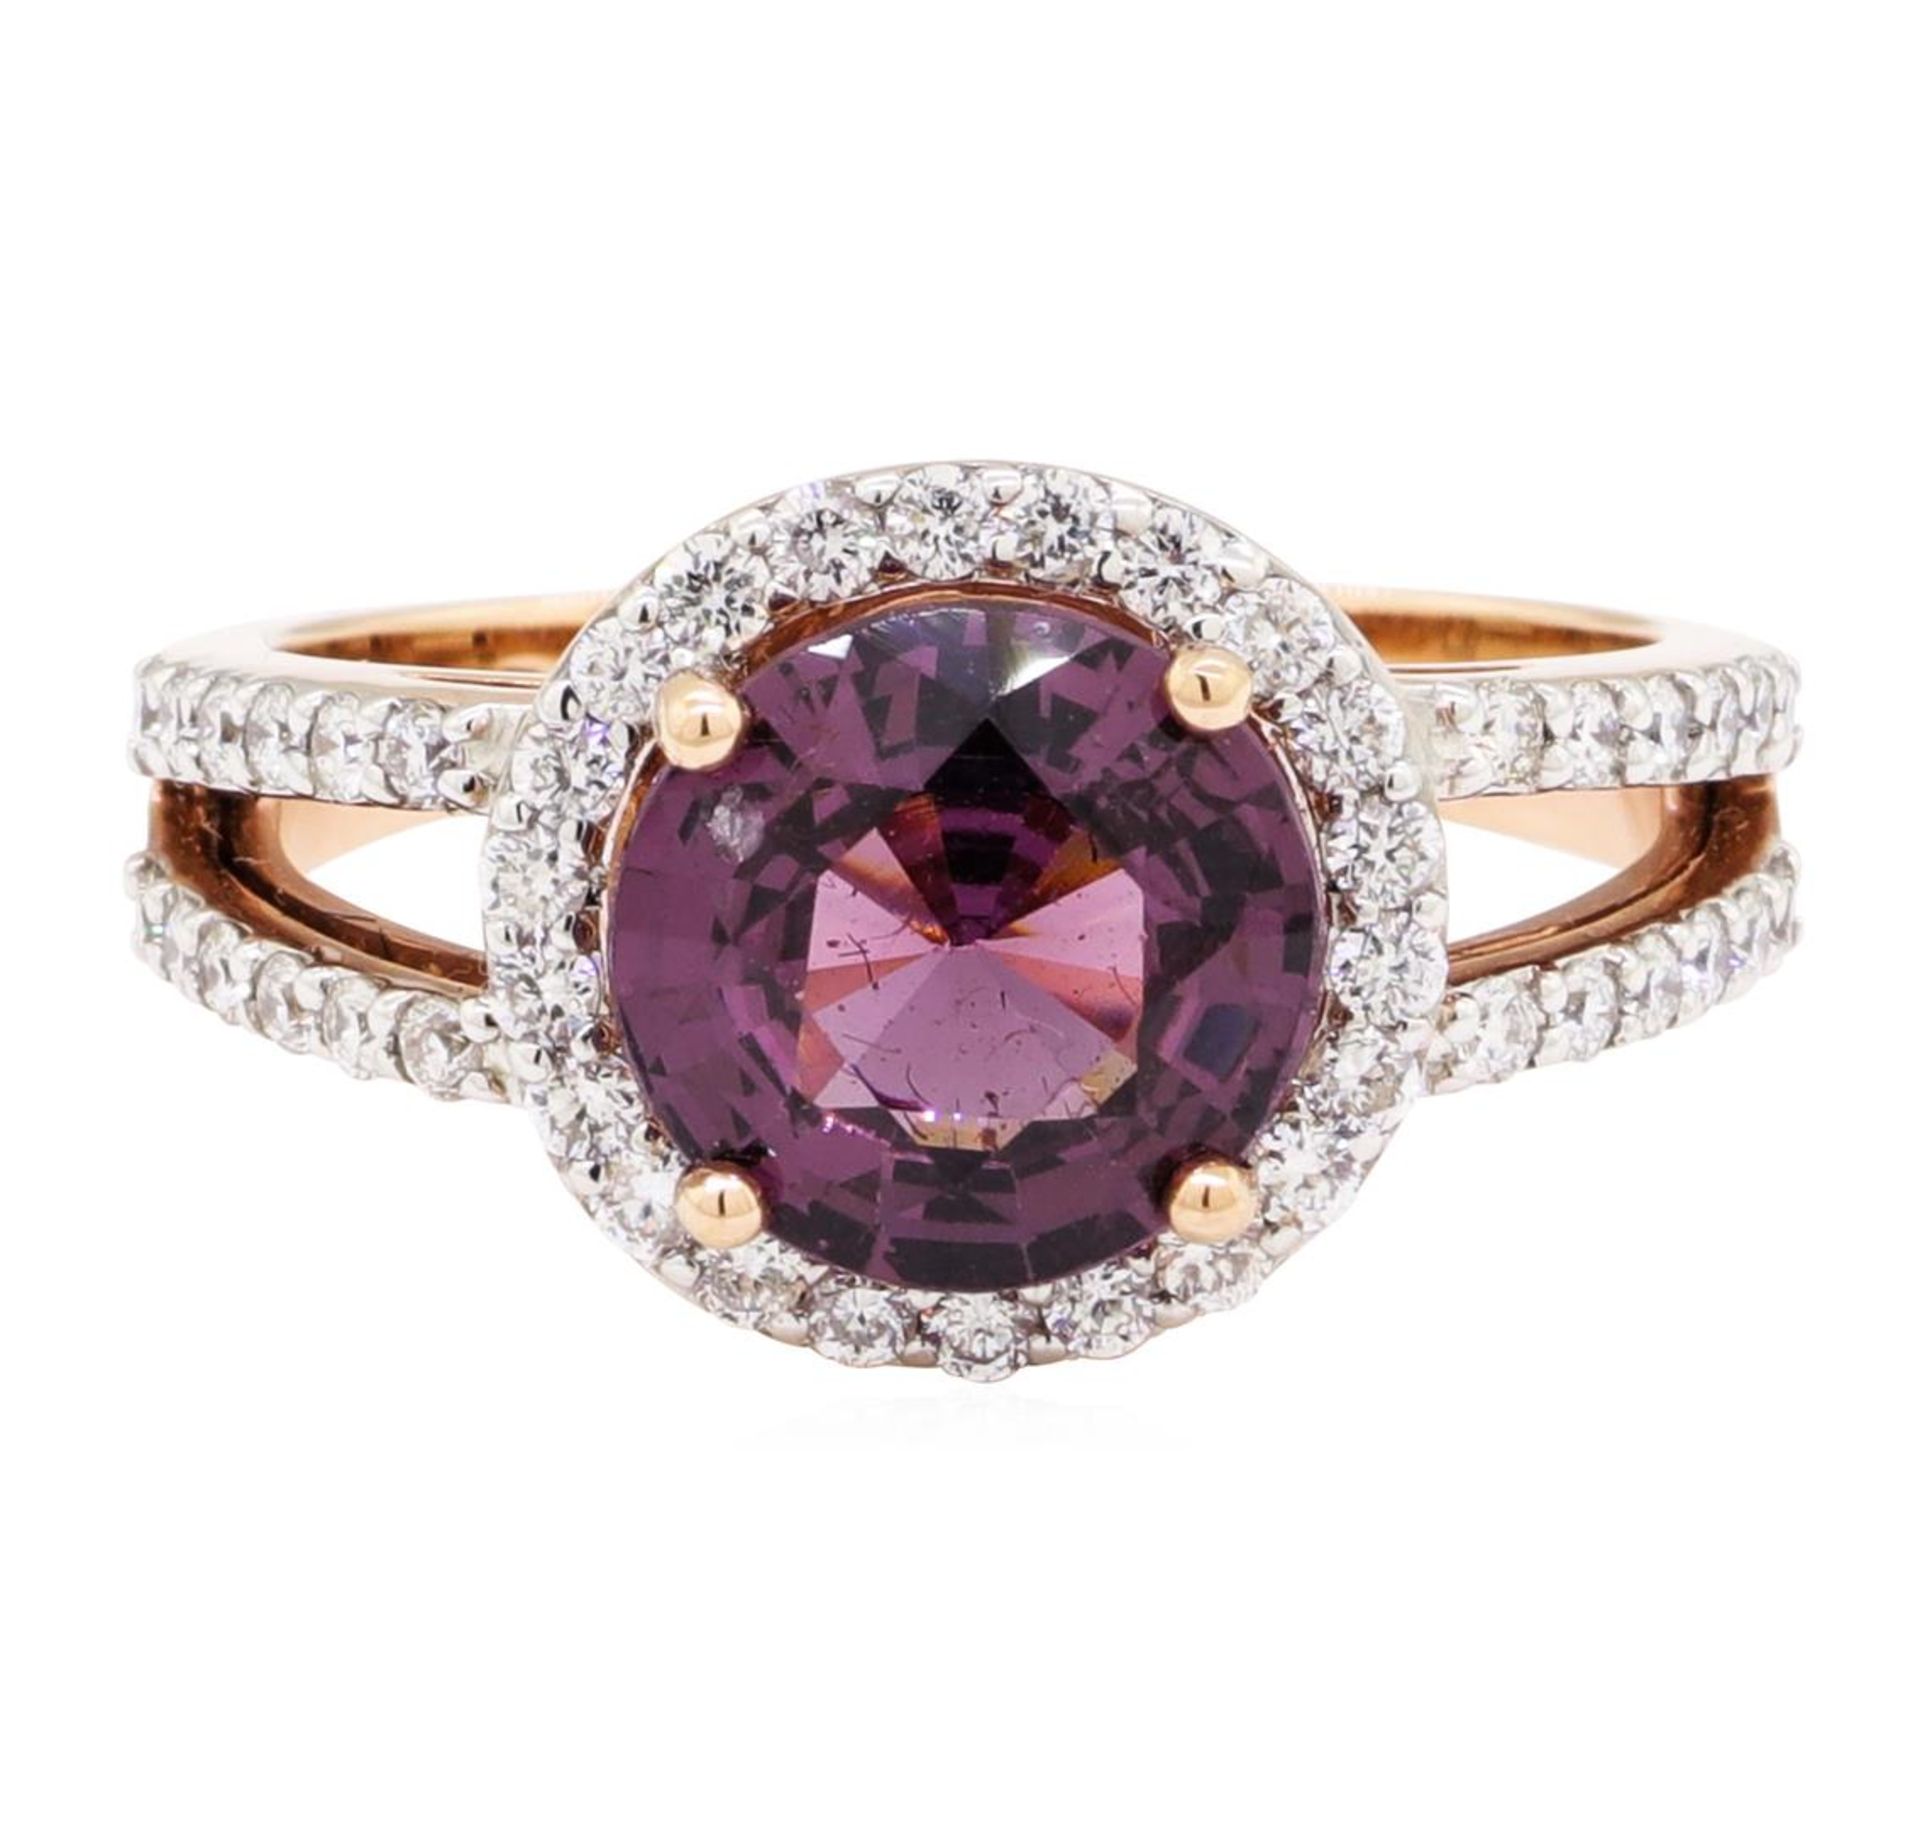 2.94 ctw Round Mixed Lavender Spinel And Round Brilliant Cut Diamond Ring - 14KT - Image 2 of 5